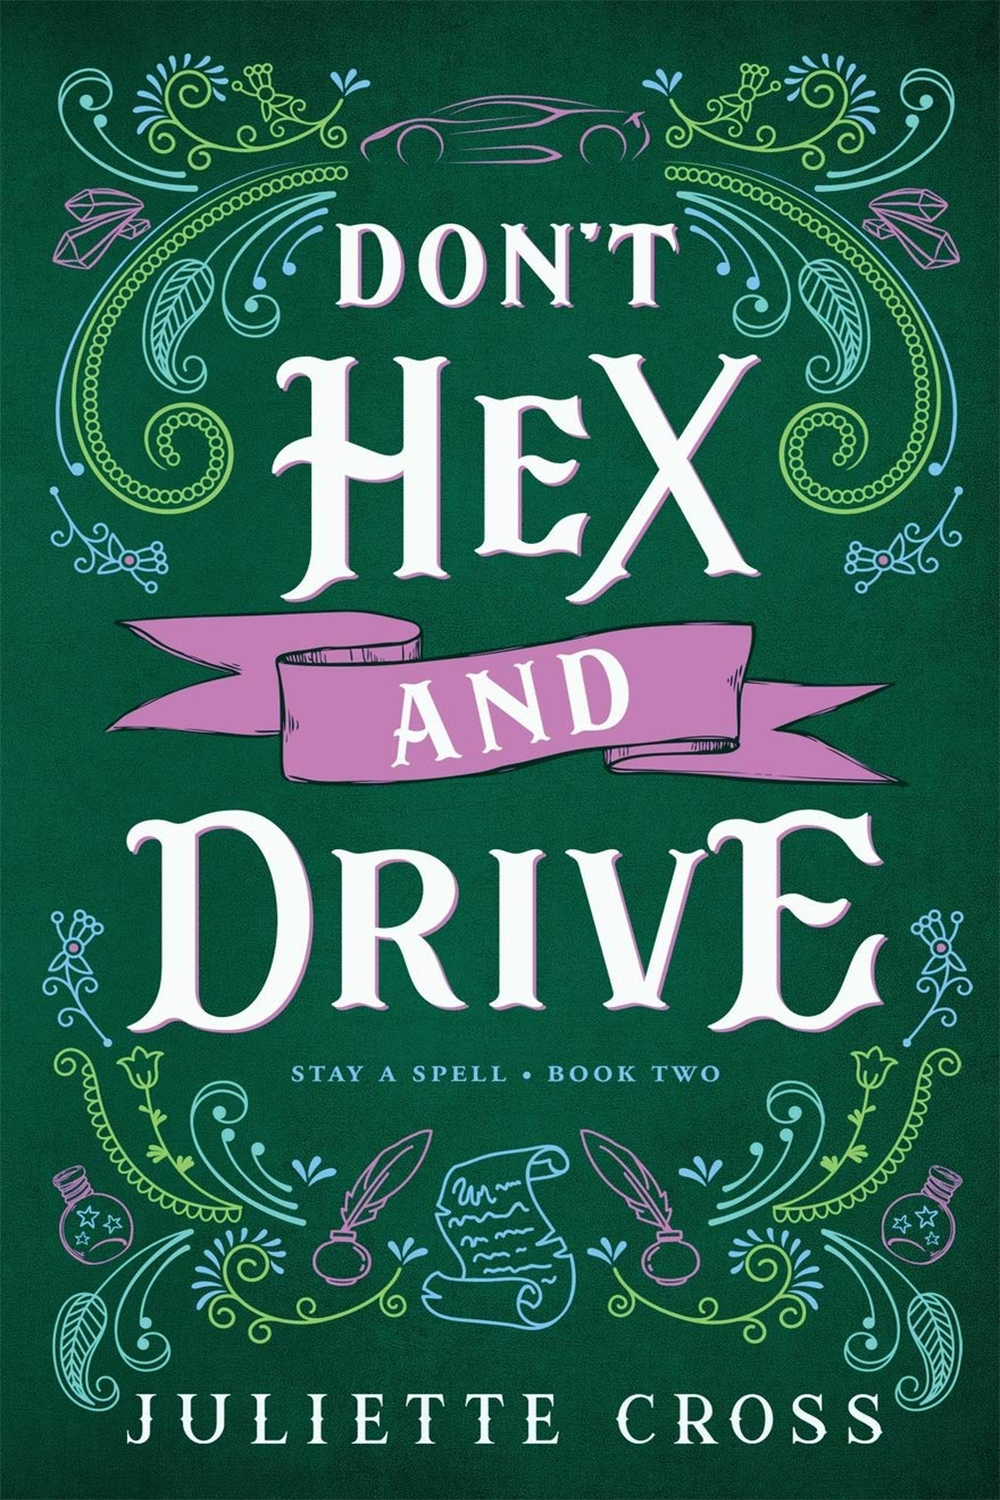 S1 E25 Don’t Hex and Drive by Juliette Cross